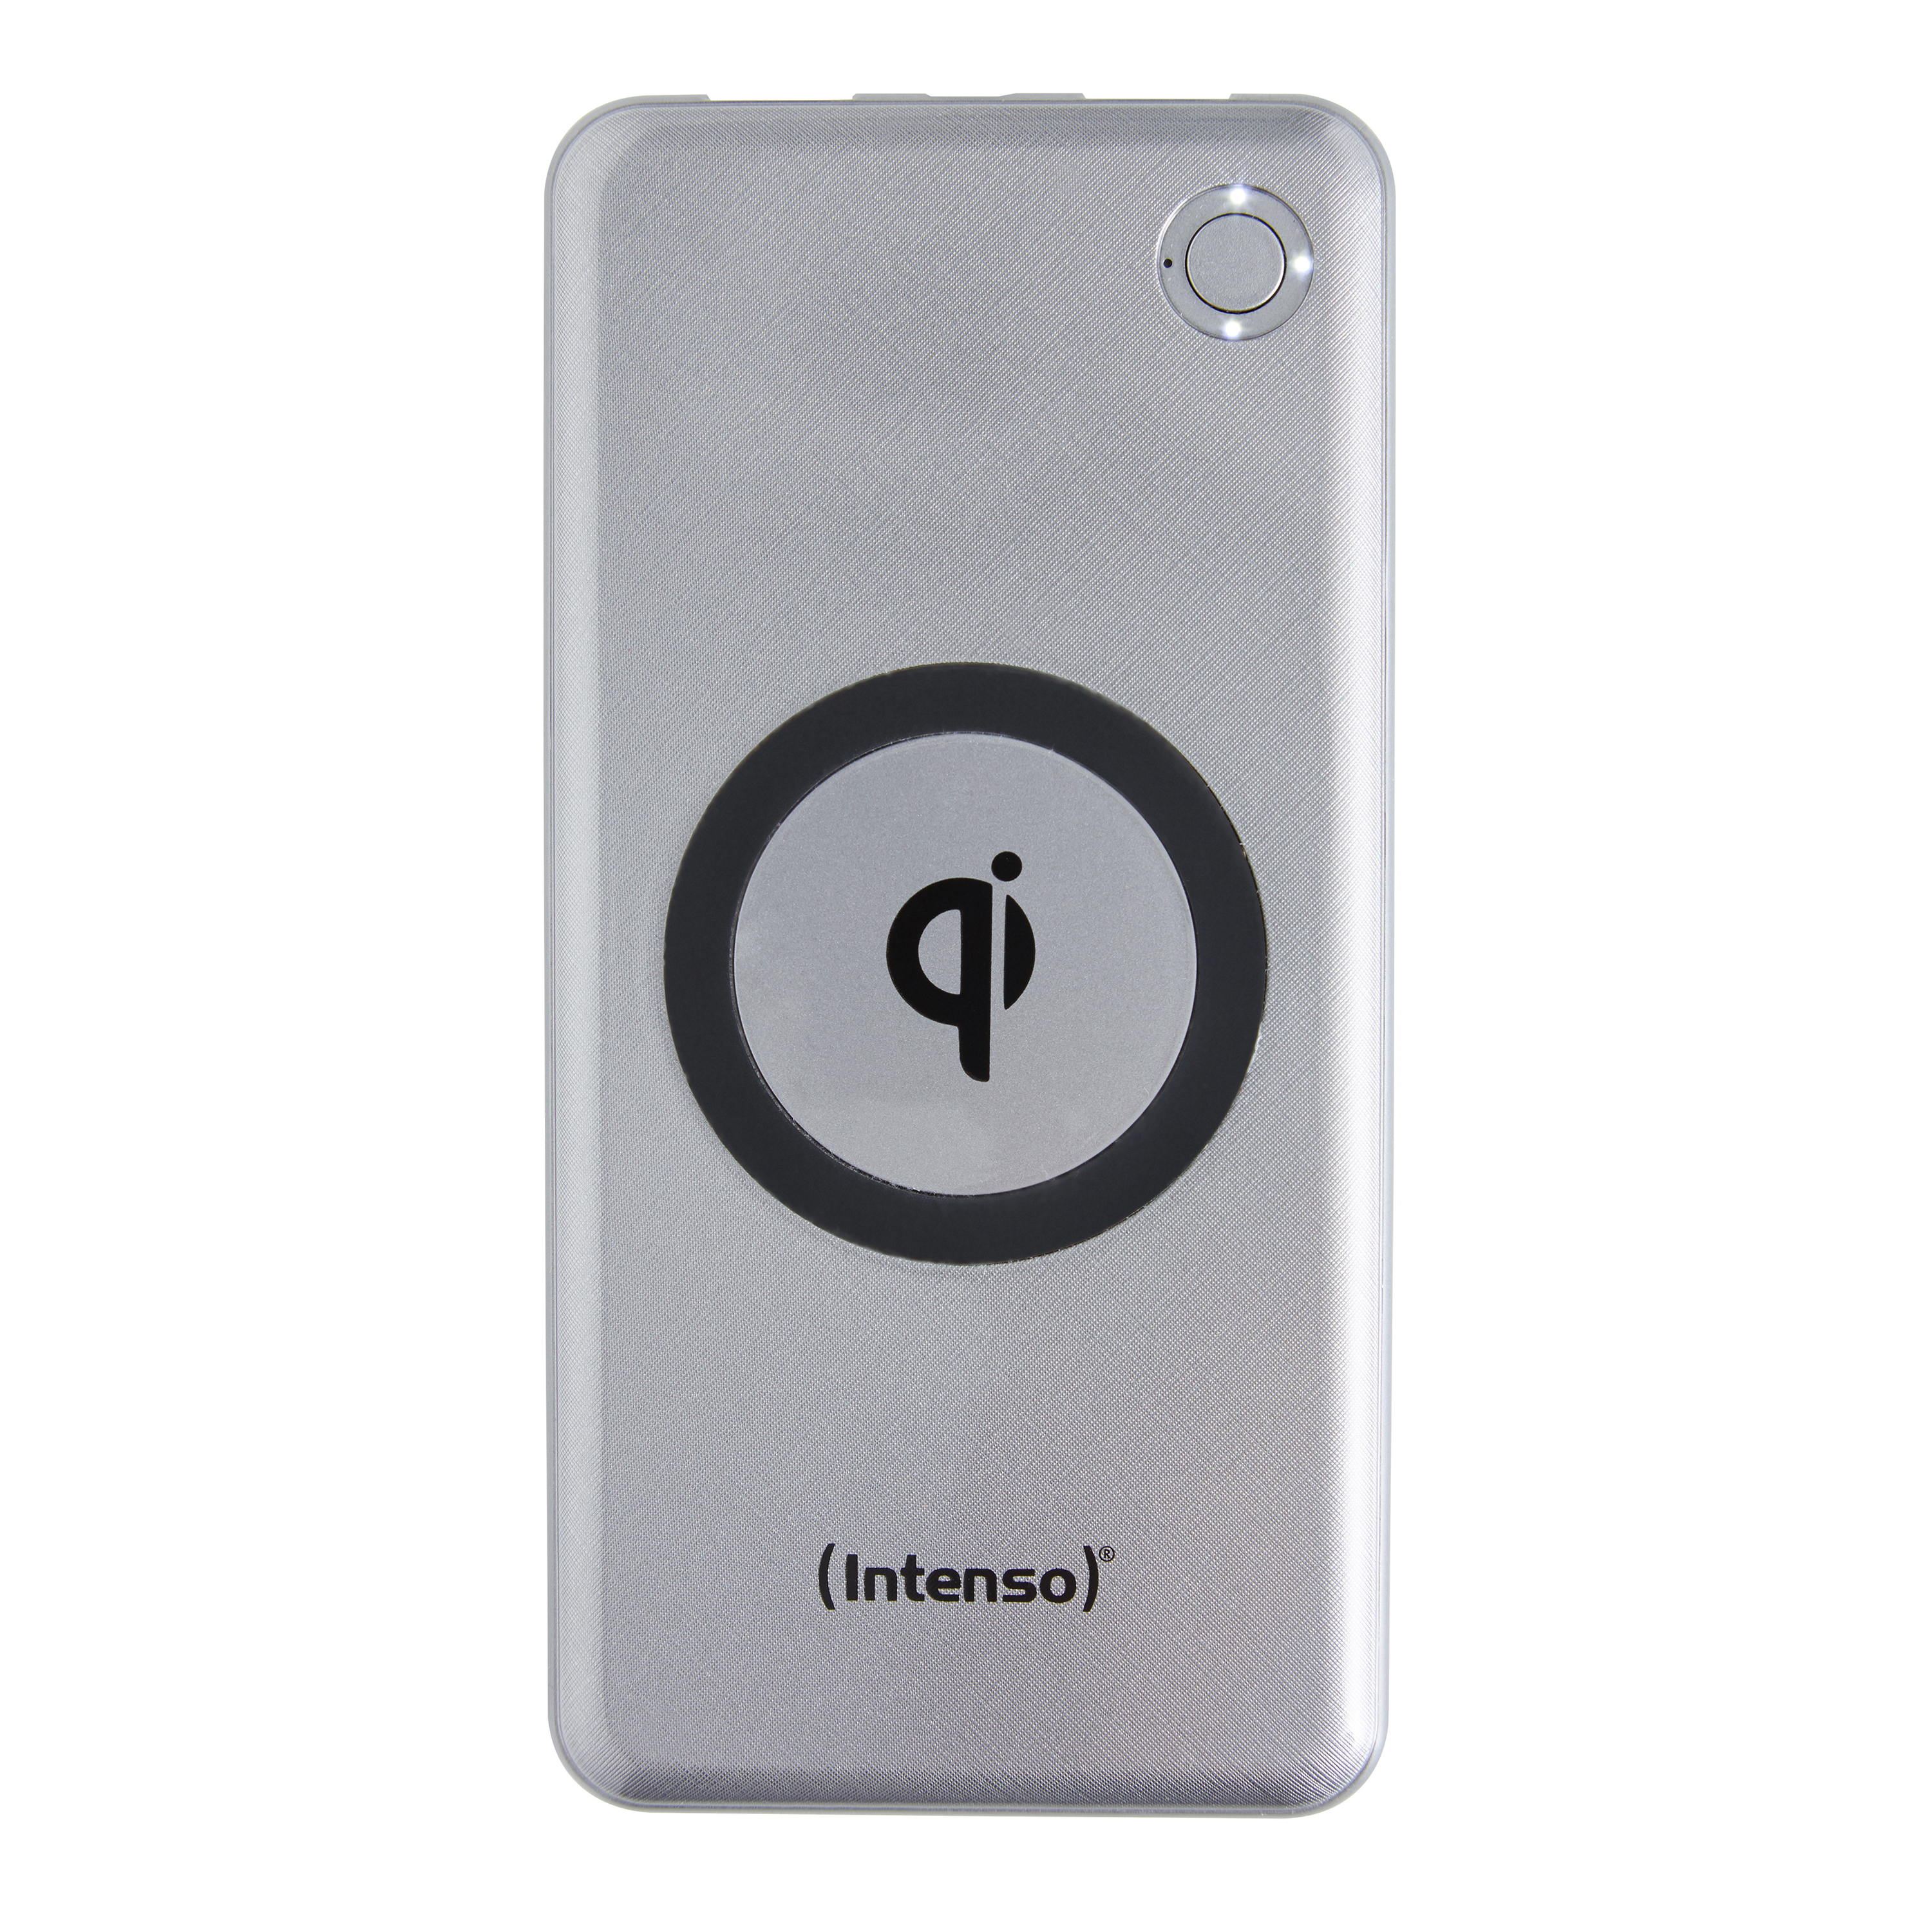 Intenso WPD10000 - 10000 mAh - Lithium Polymer (LiPo) - Quick Charge 3.0 - Kabelloses Aufladen - Silber